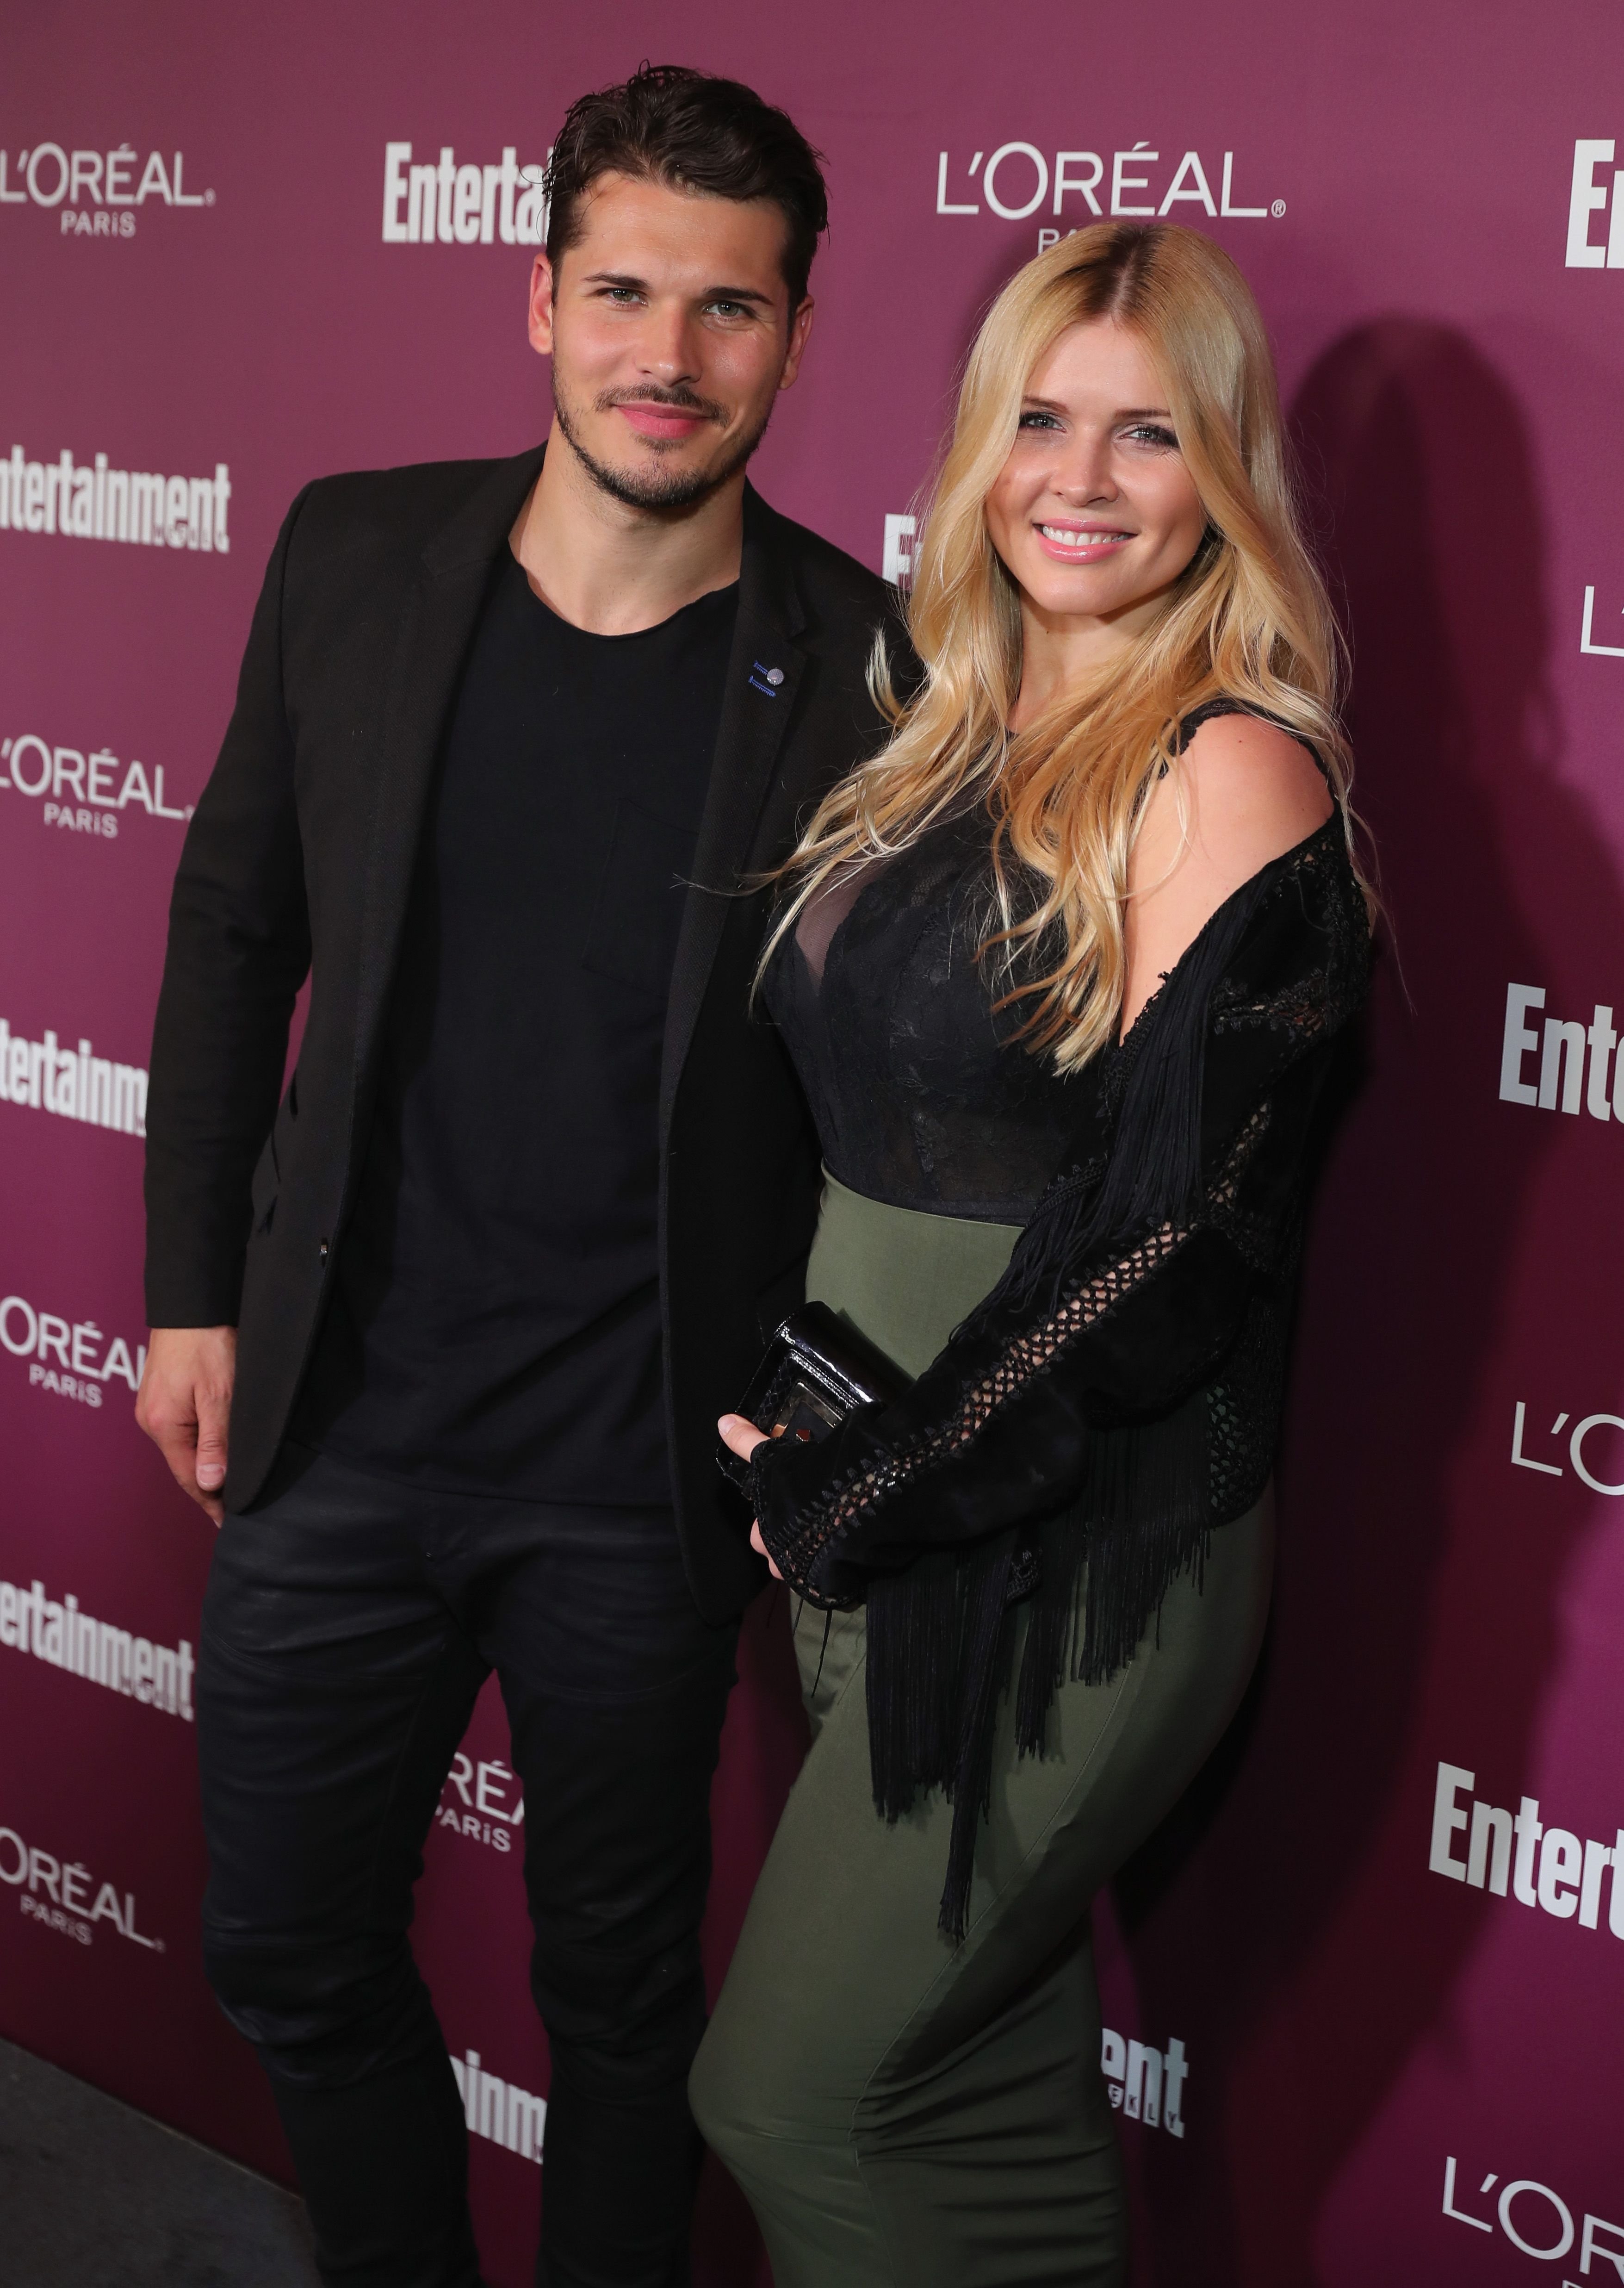 Gleb Savchenko and Elena Samodanova at the 2017 Entertainment Weekly Pre-Emmy Party at Sunset Tower on September 15, 2017. | Photo: Getty Images